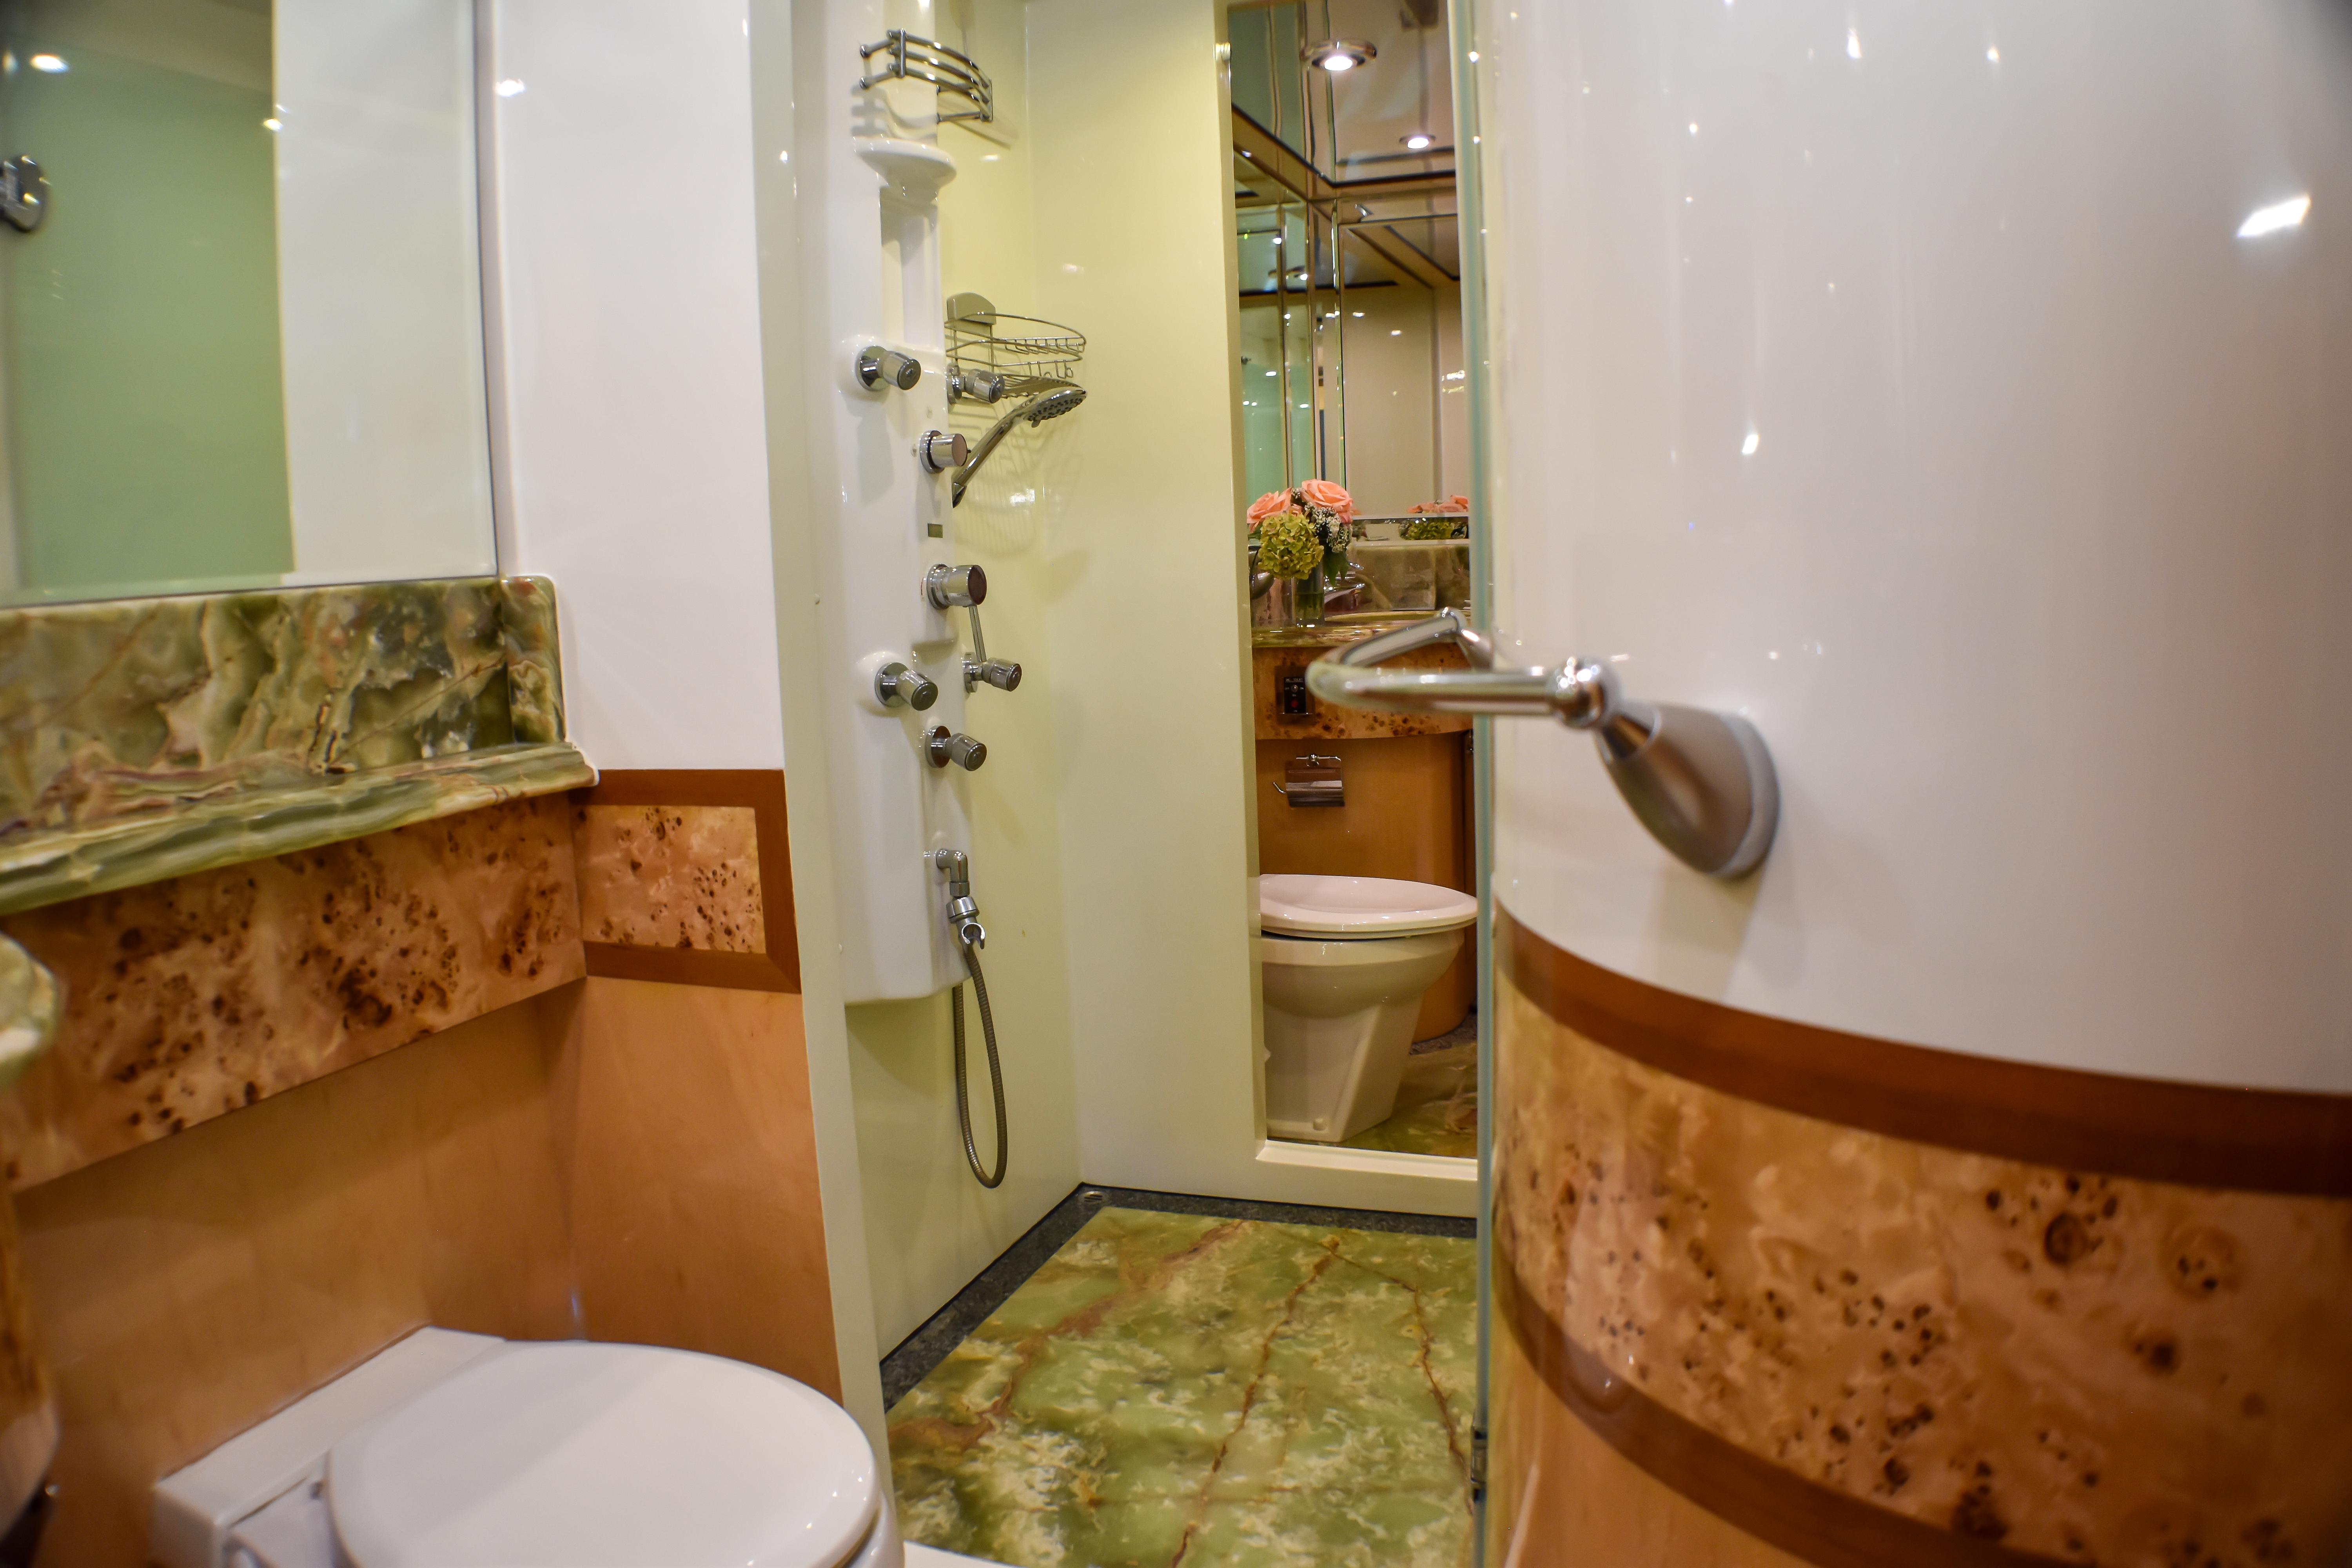 HIS/HERS MASTER BATH SHOWER